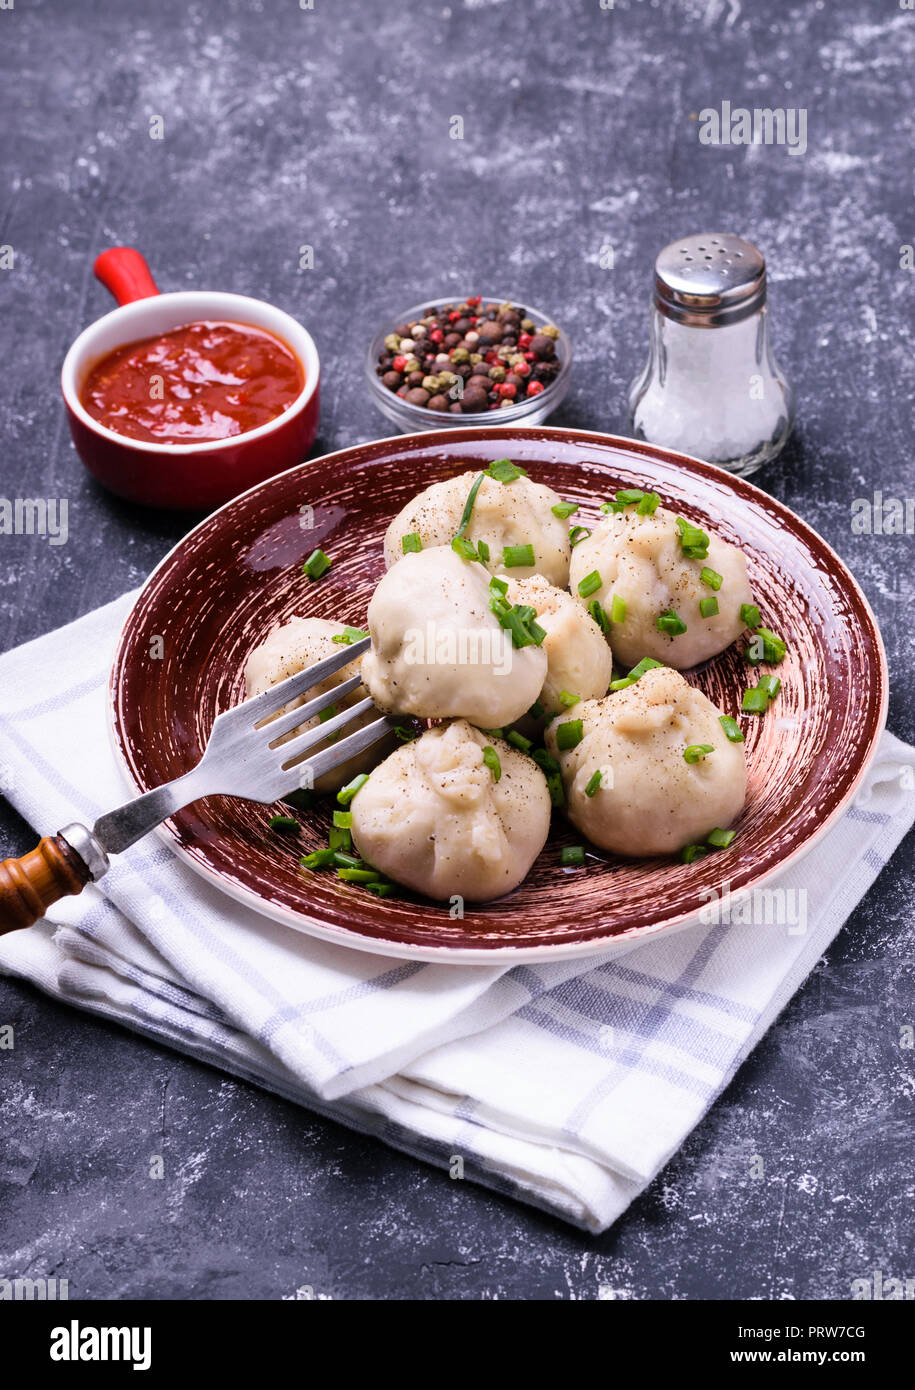 Georgian dumplings Khinkali with meat, green onion and tomato sauce. Served on brown ceramic plate with bowl of sauce, pepper mix and salt. Dark concr Stock Photo